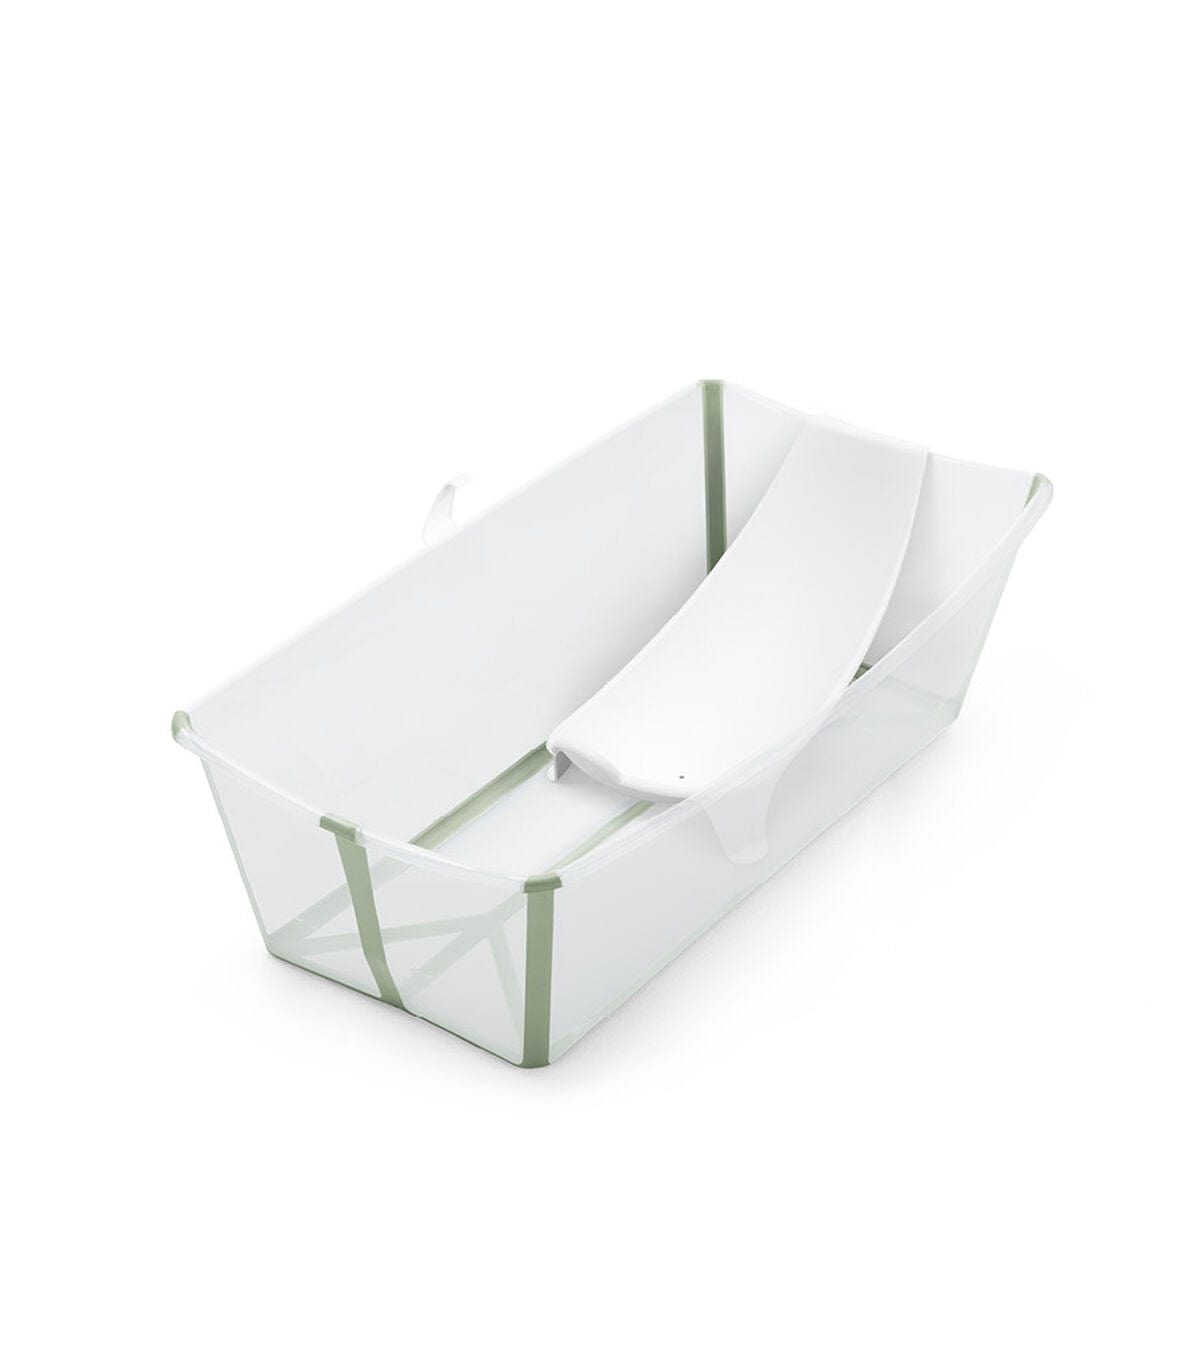 Stokke Flexi Bath® X-Large with Newborn Support in Transparent Green Bathing & Grooming 639604 7040356396016